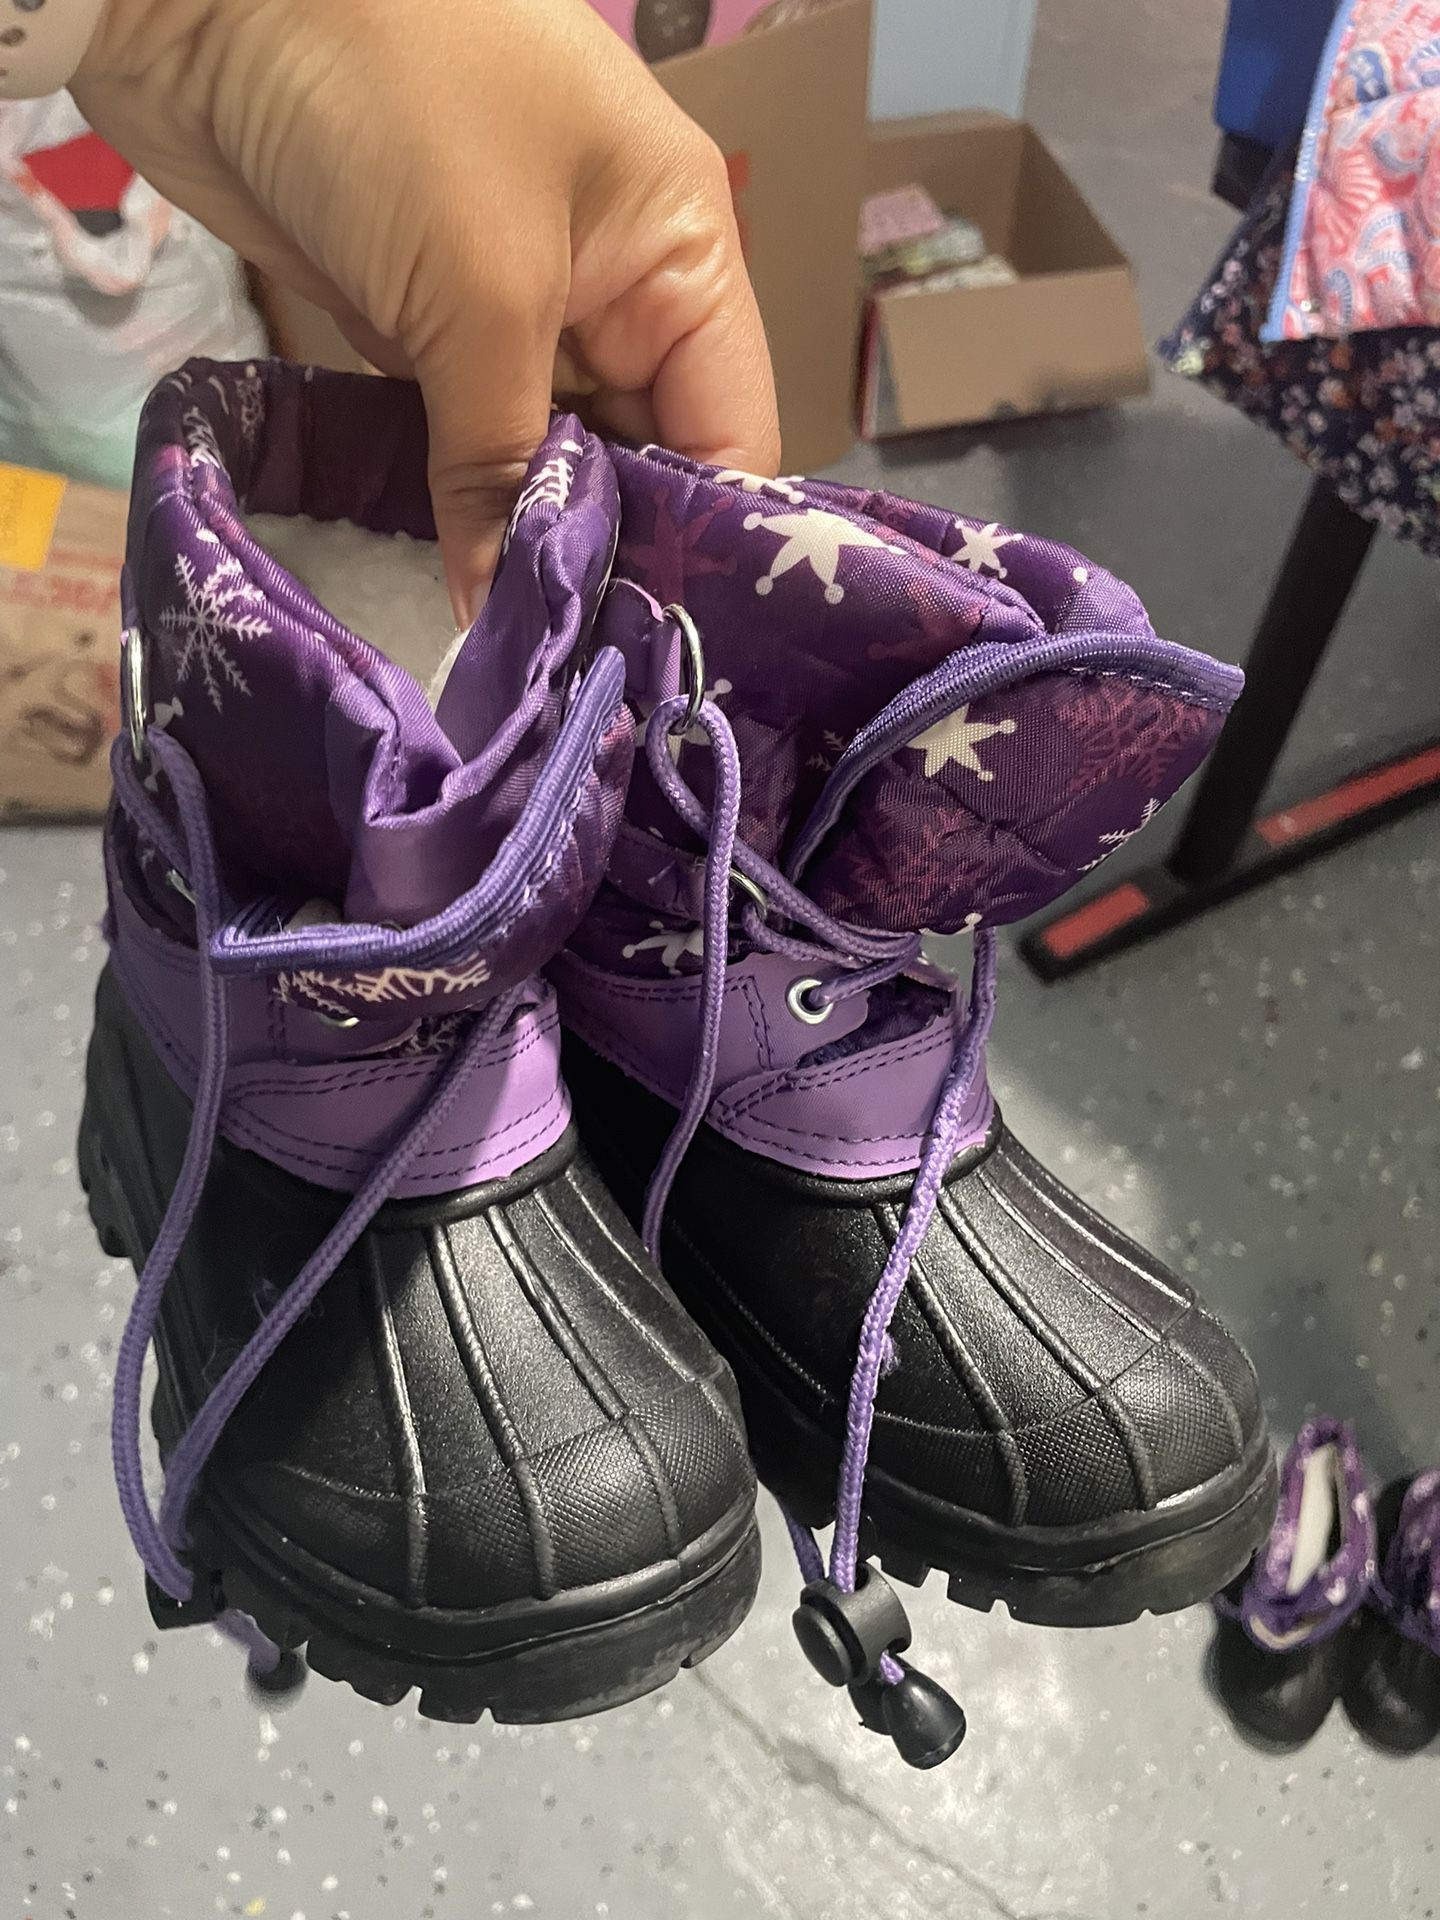 Purple Snow Boots Toddler size 9 